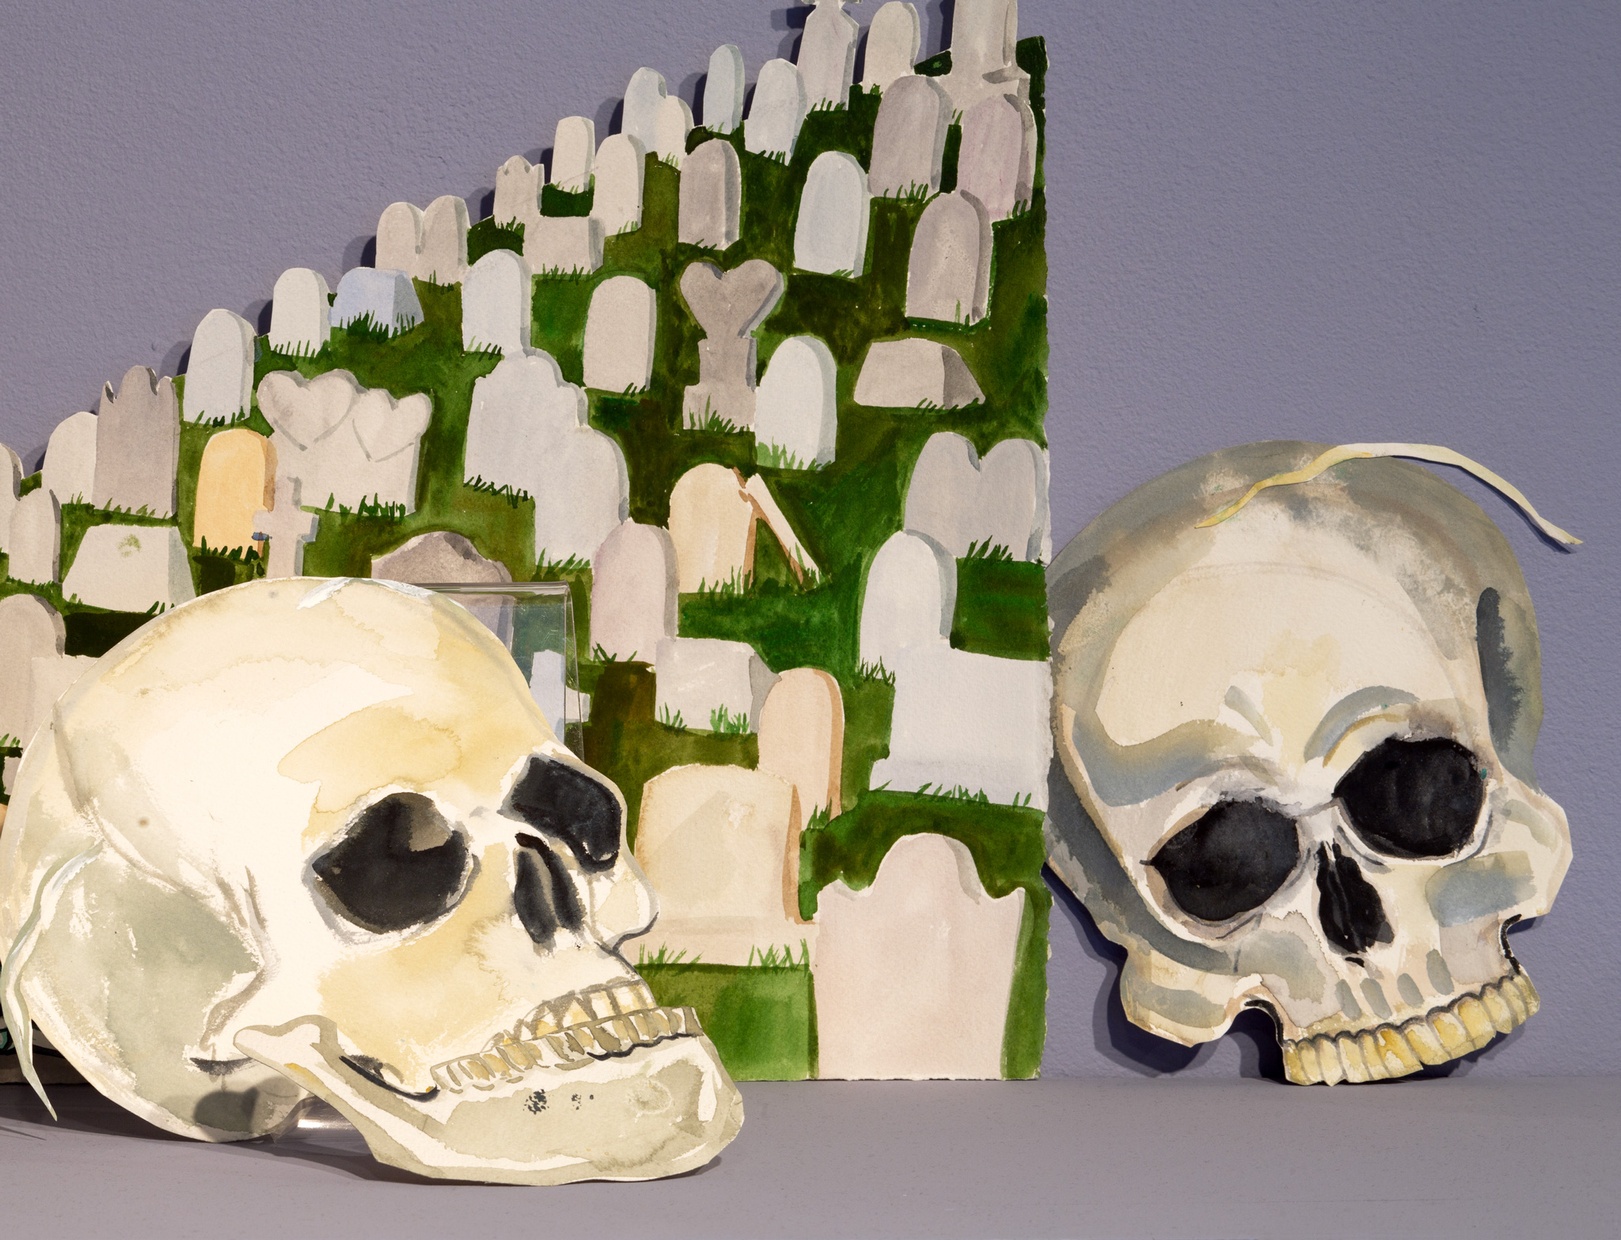 Painted paper cutouts of two skulls lean against a painted cemetery scene, all against a light purple wall.